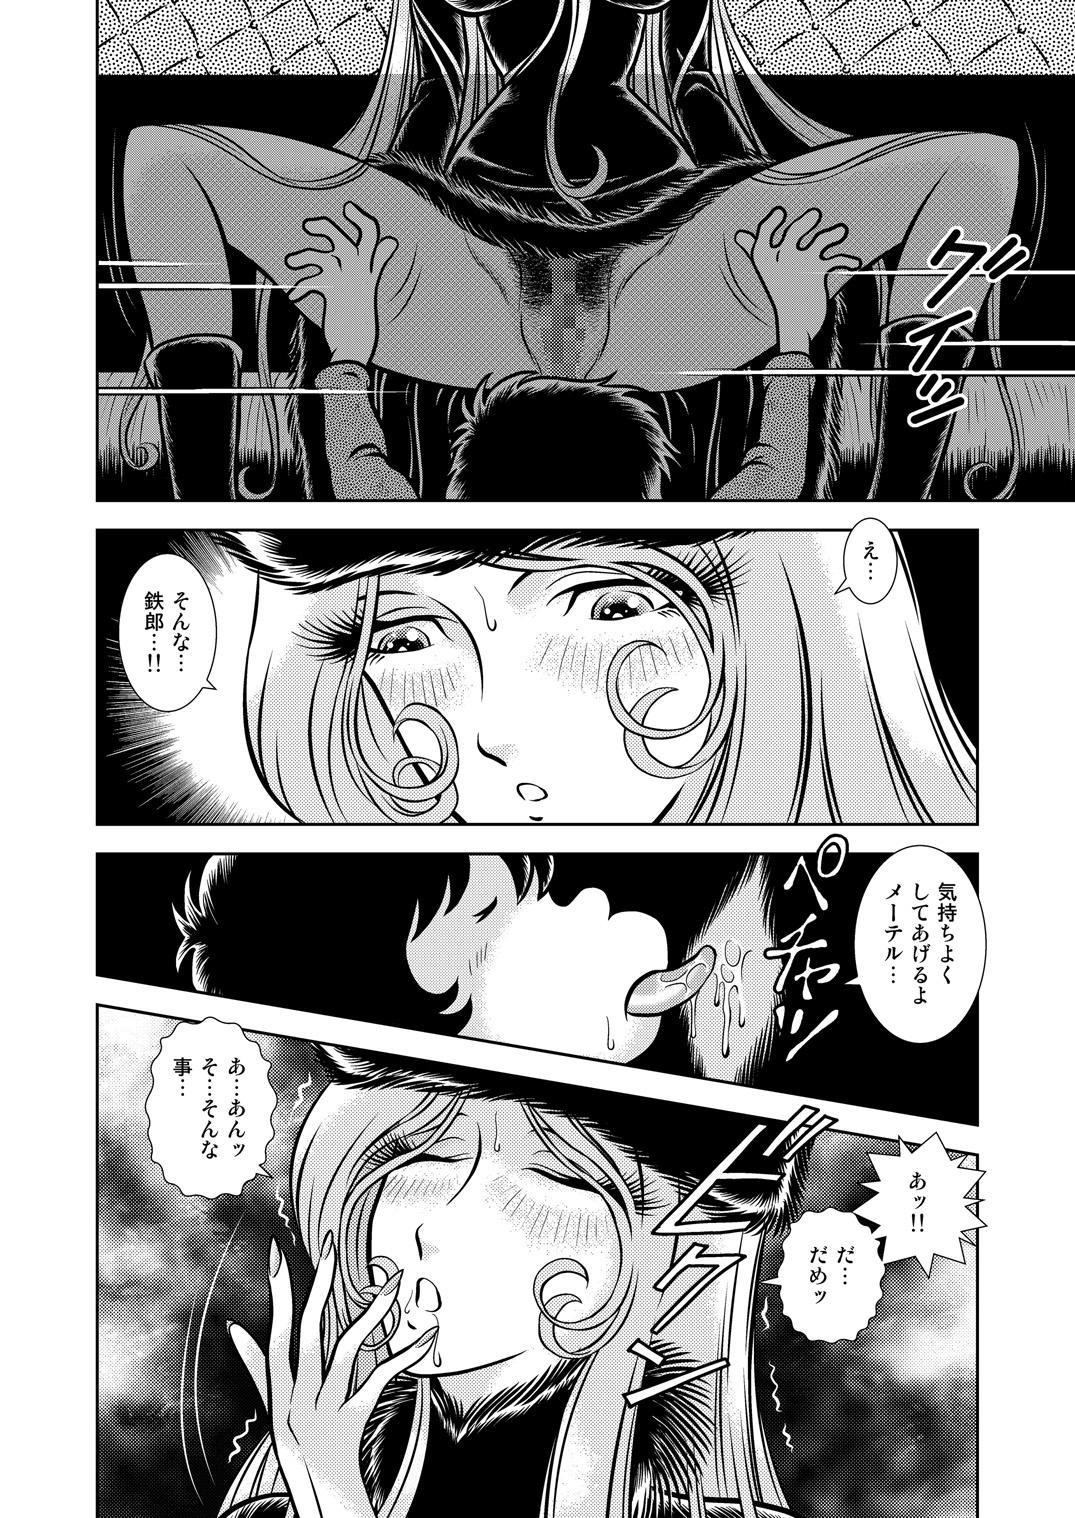 Gay Pissing Maetel Story 11 - Galaxy express 999 Amateur Sex - Page 6